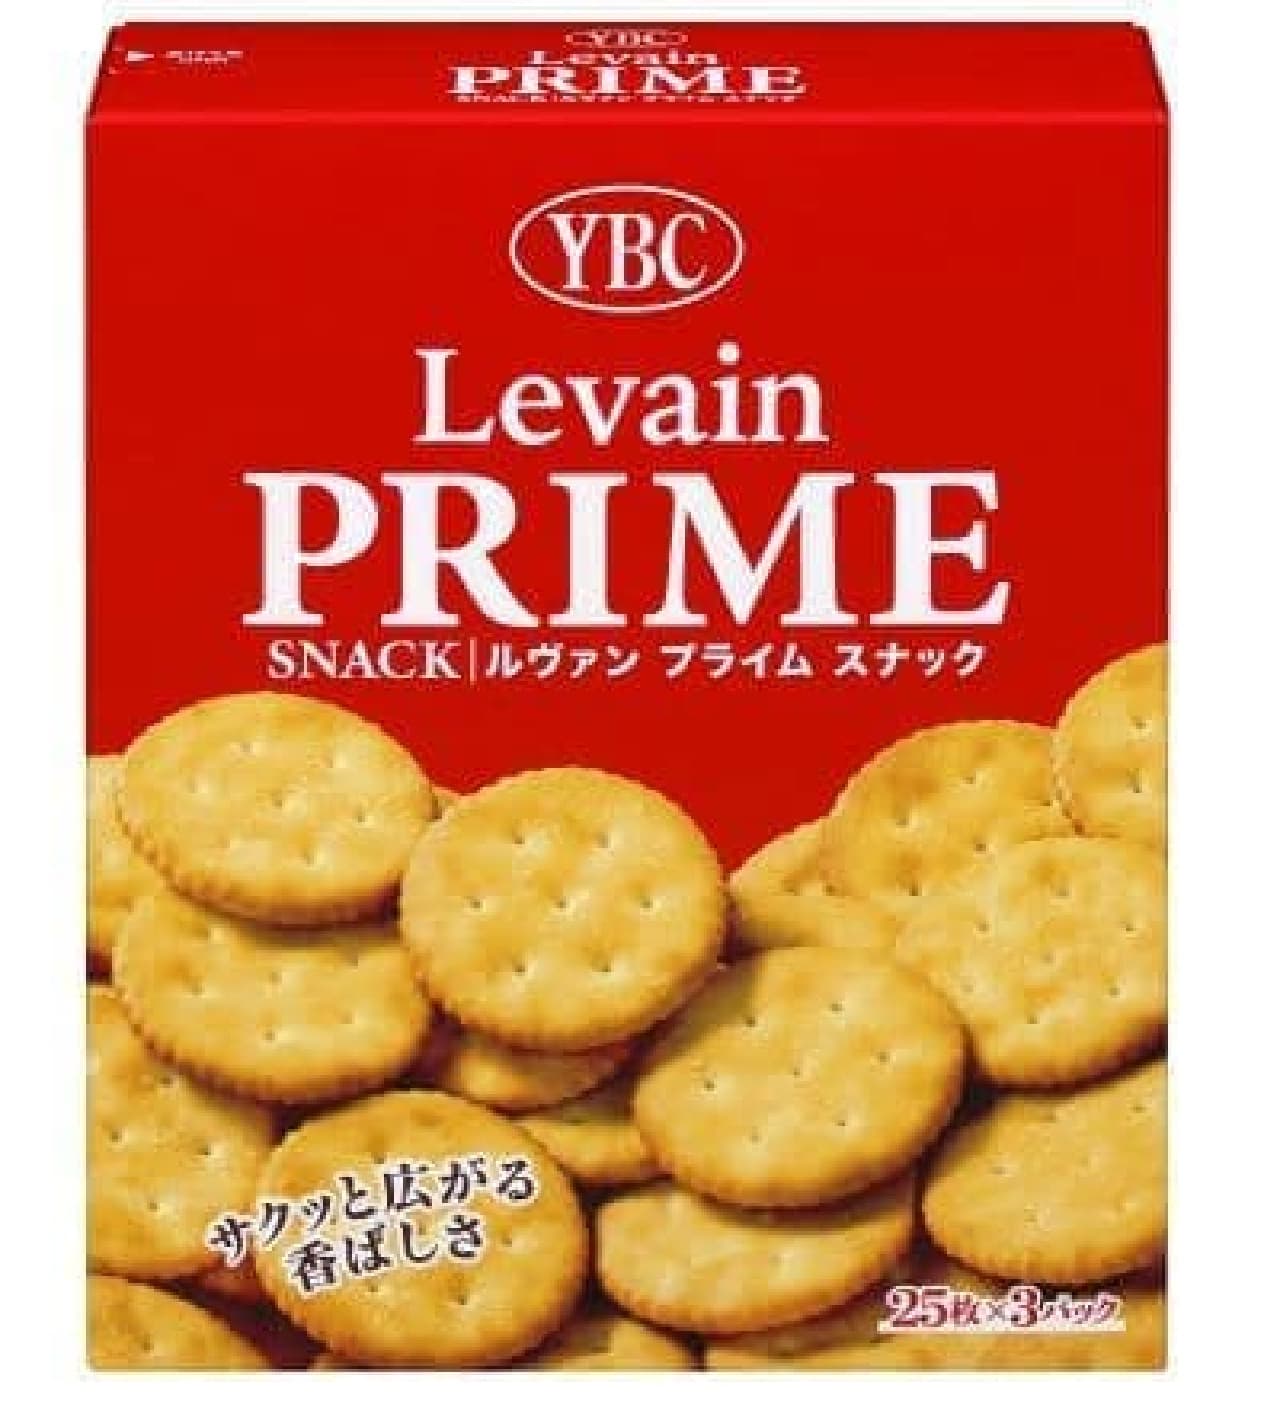 "Luvin Prime Snack" is a cracker that you can enjoy a pleasant texture